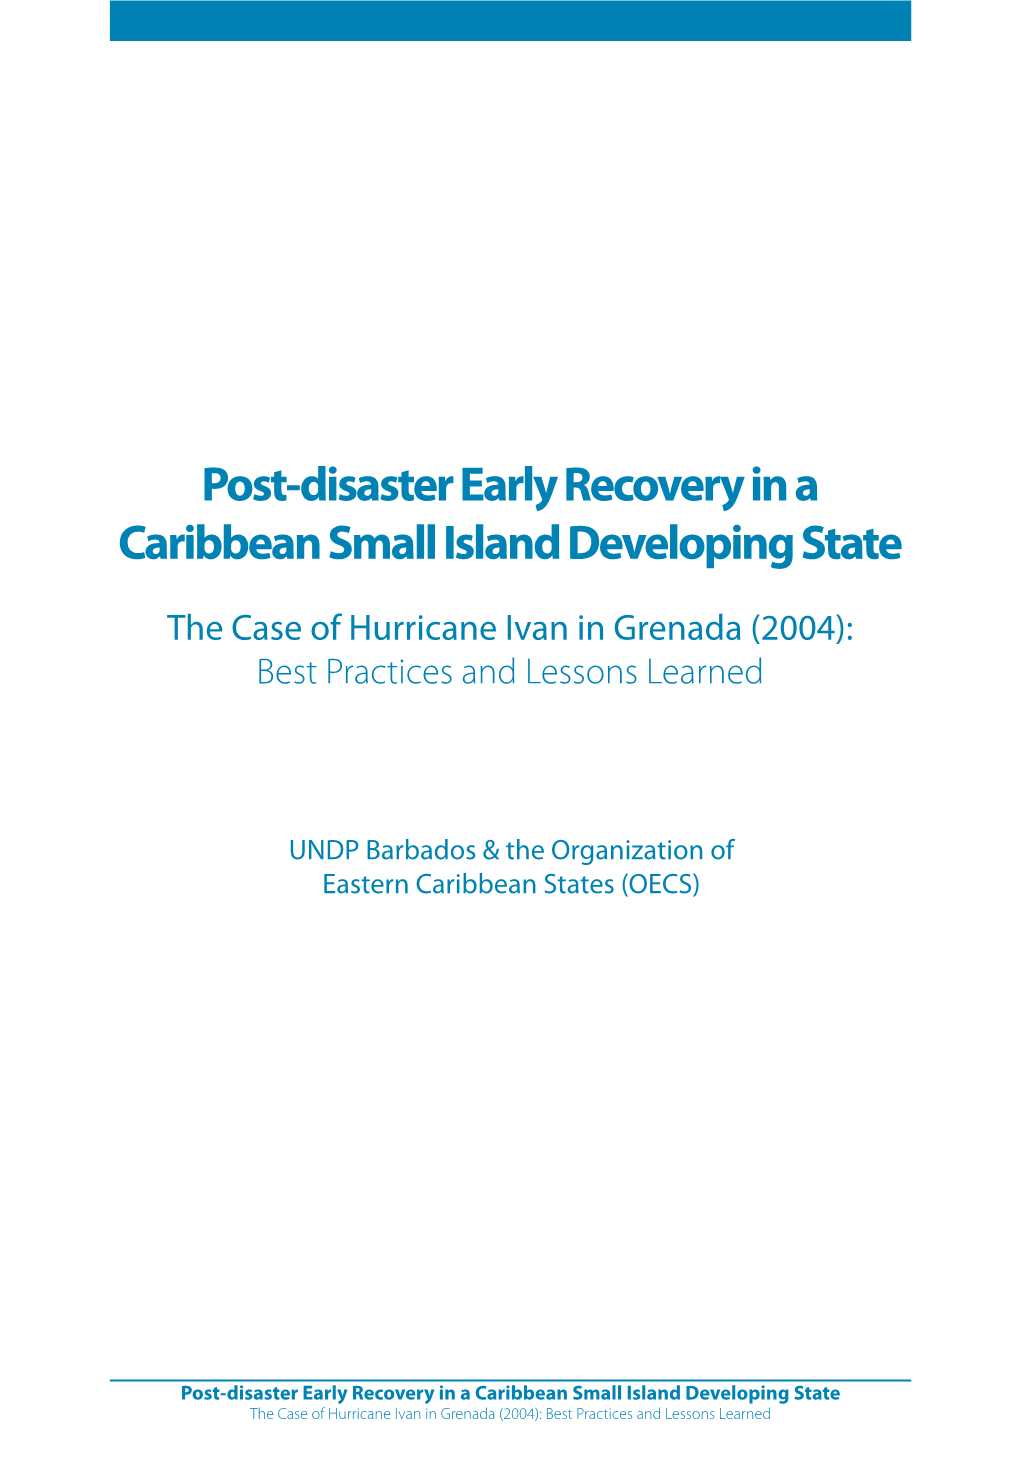 Post-Disaster Early Recovery in a Caribbean Small Island Developing State